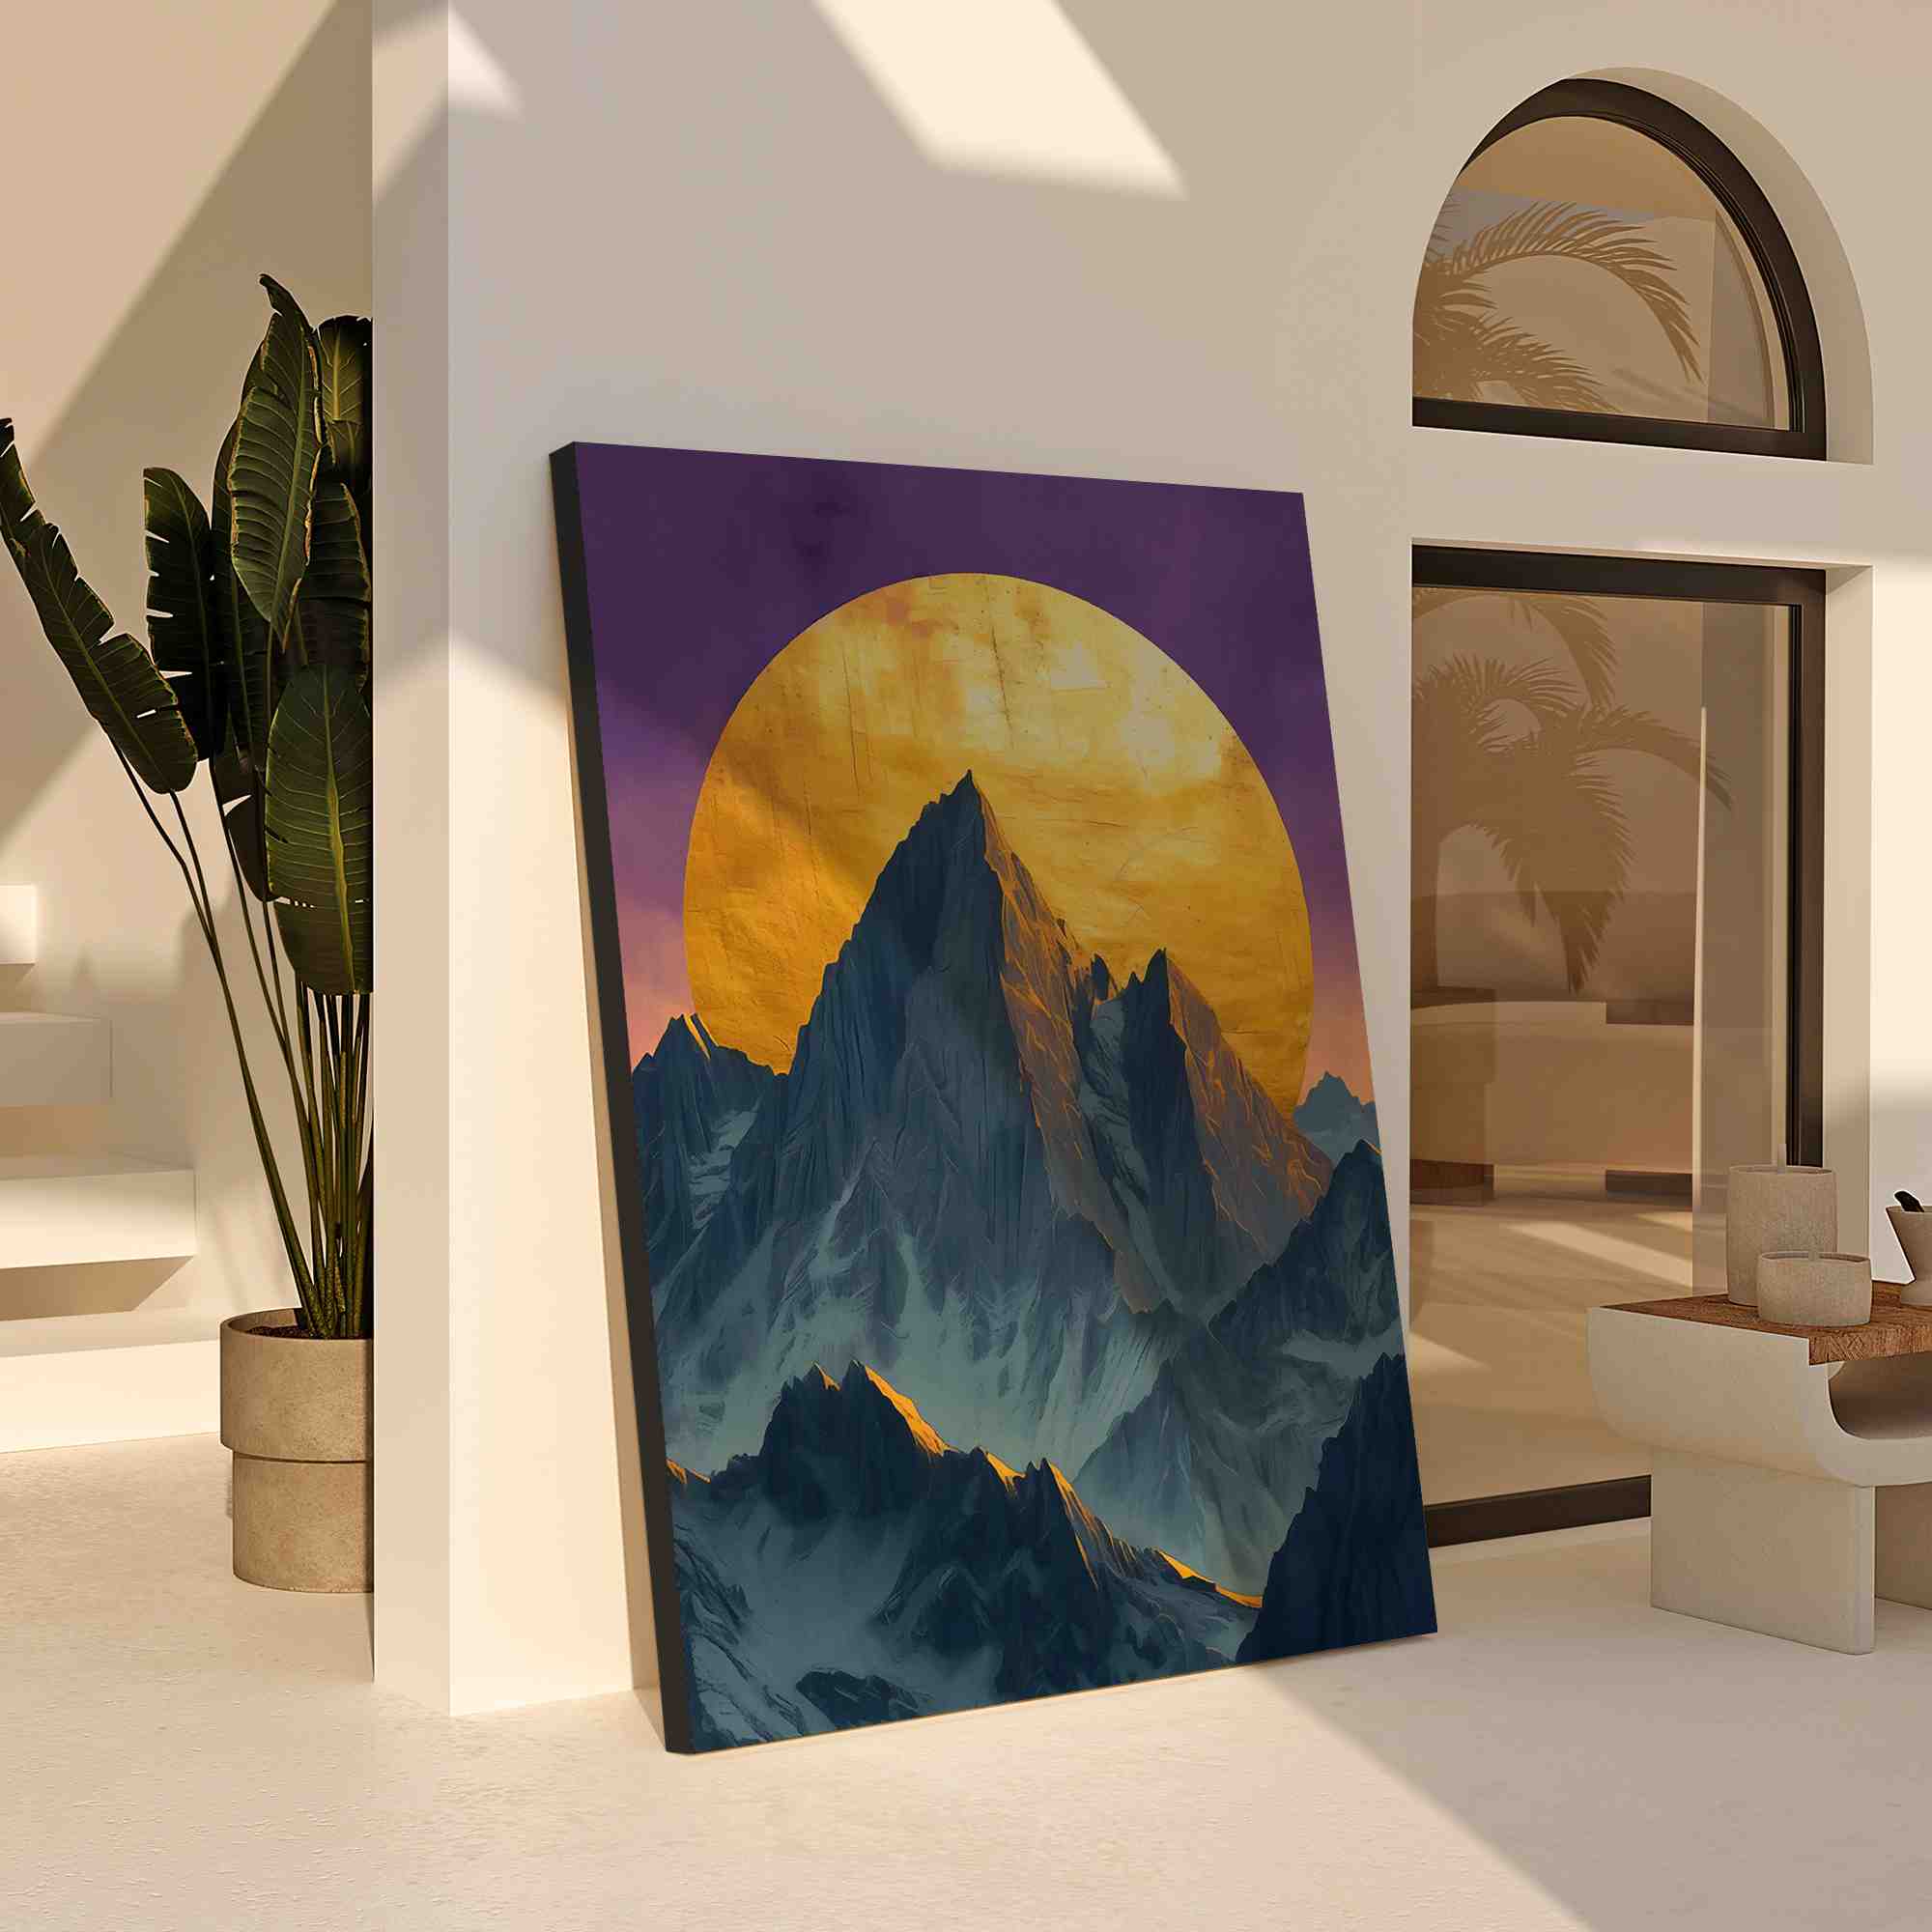 a painting of a mountain range with a full moon in the background